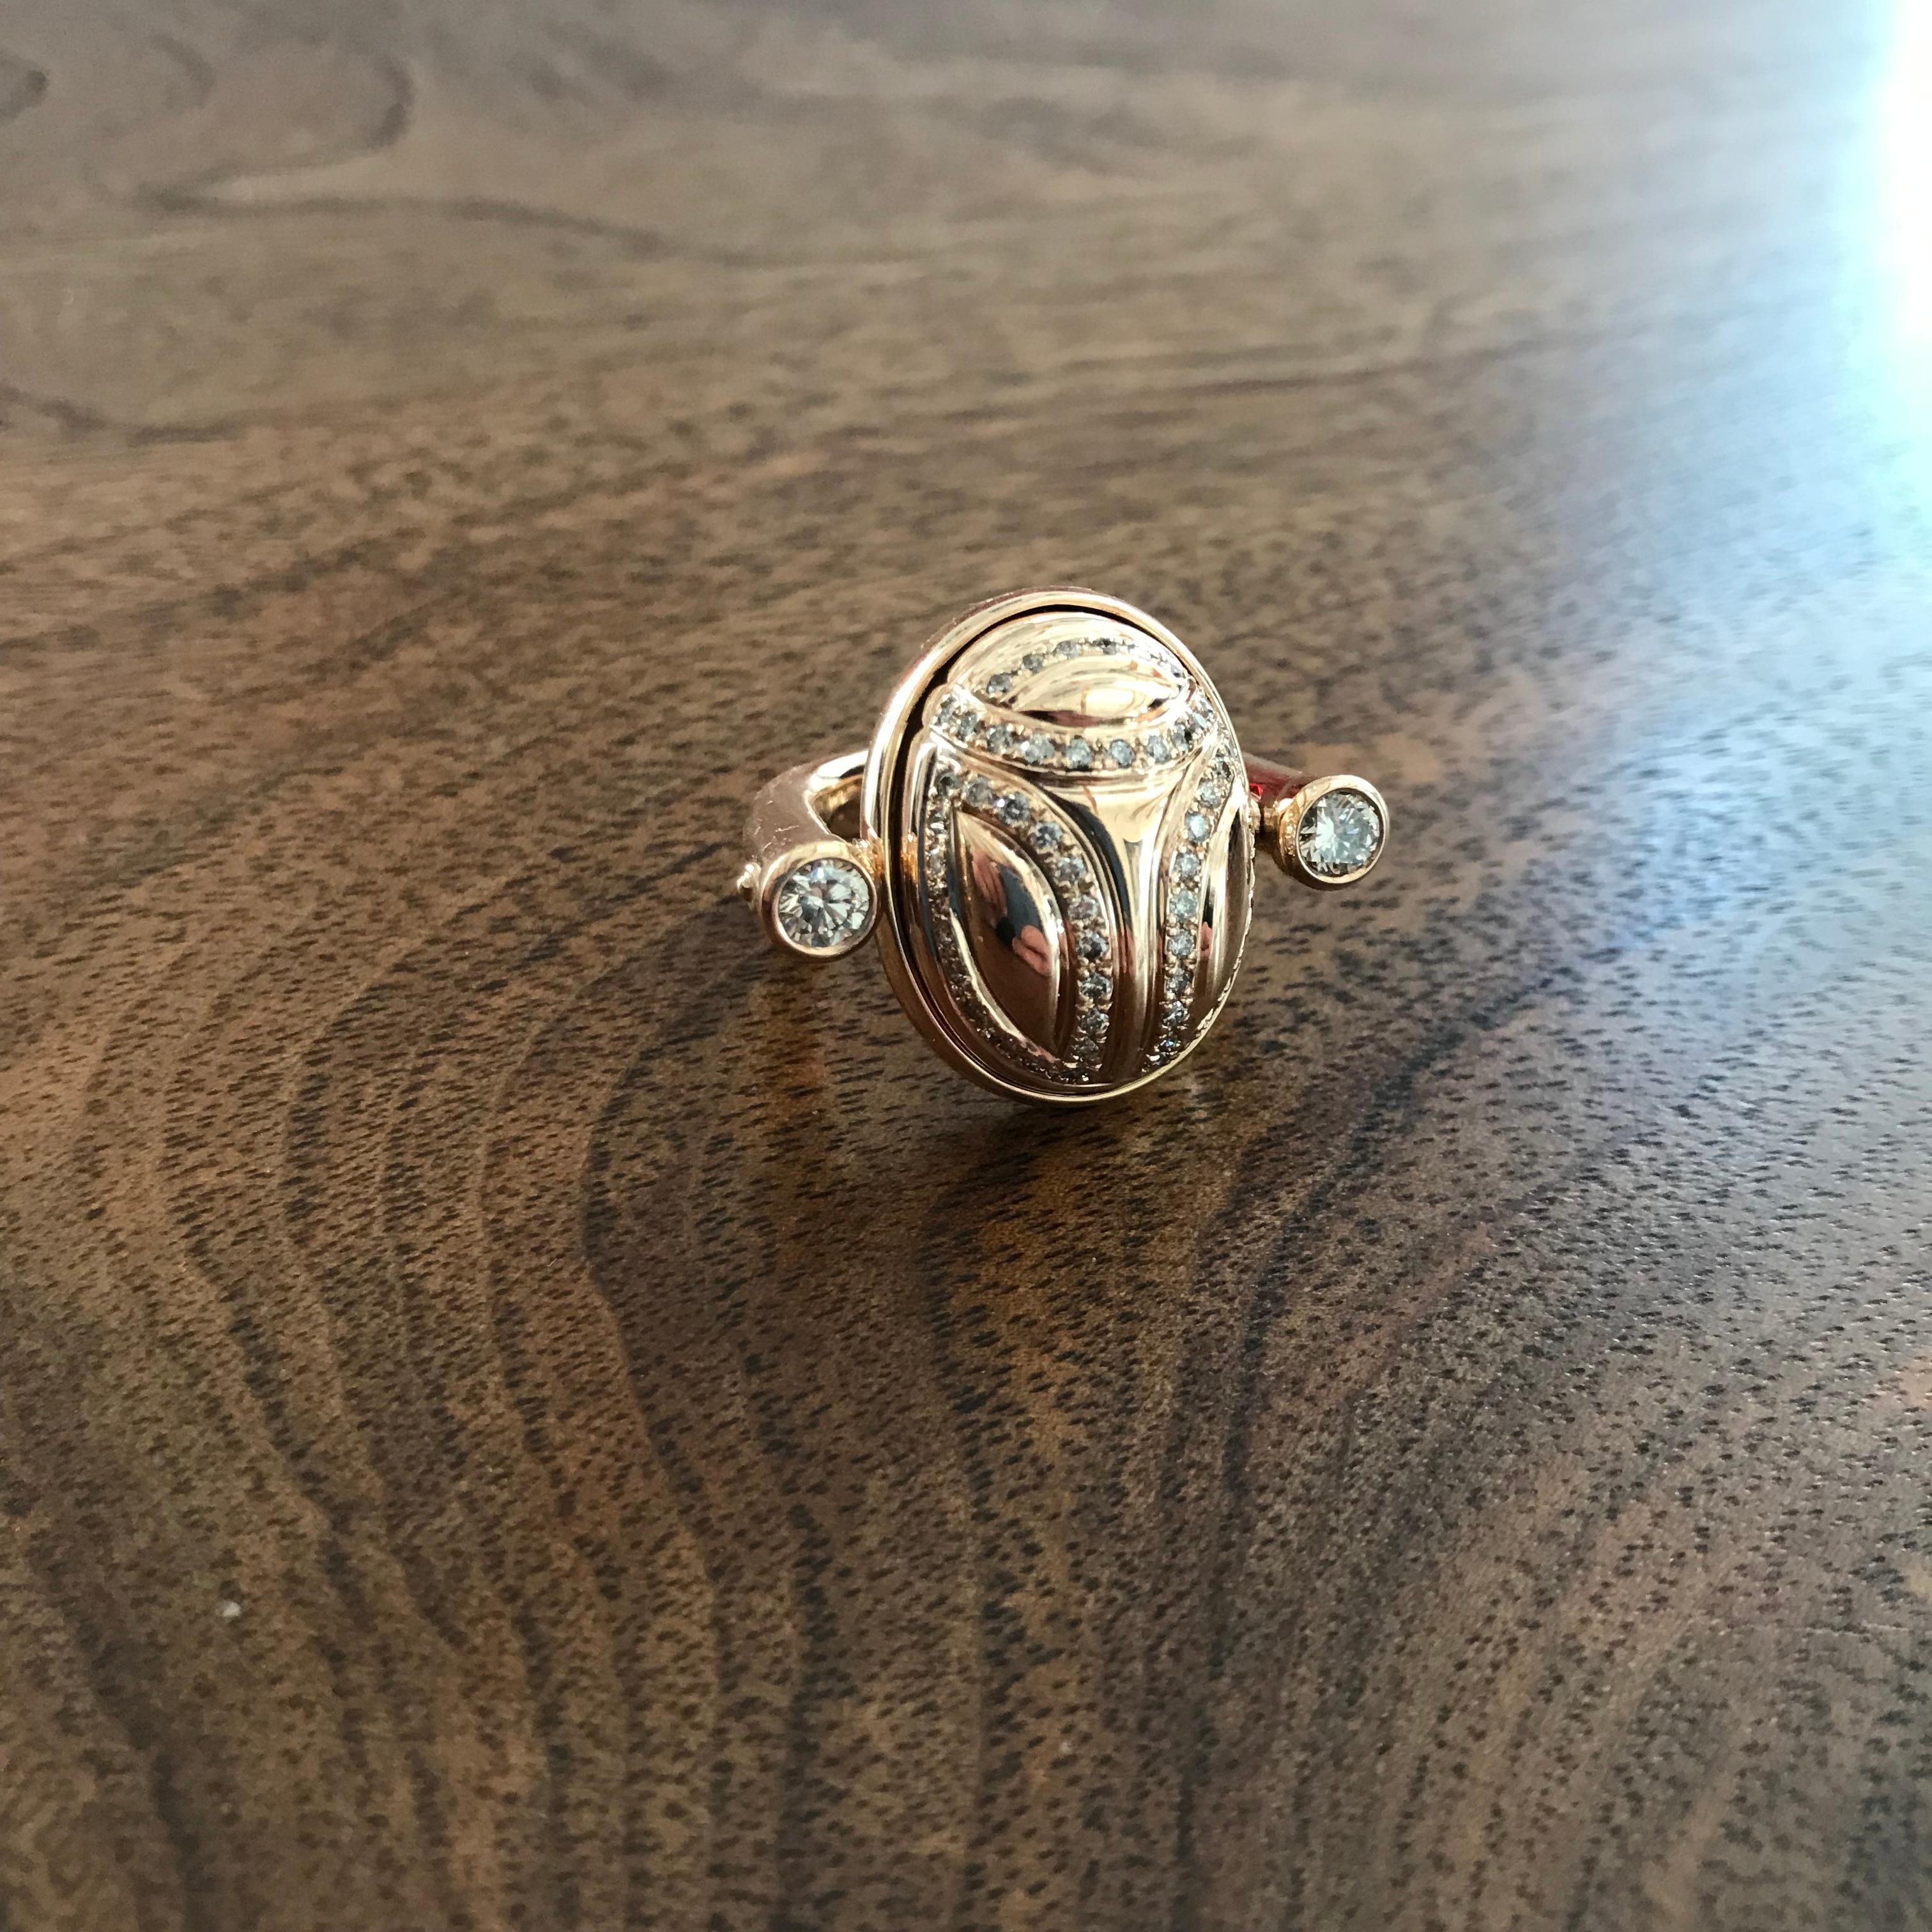 Egyptian Revival Scarab Ring in 18 Carat Rose Gold and Cognac Colored Diamonds 1.05 Carat